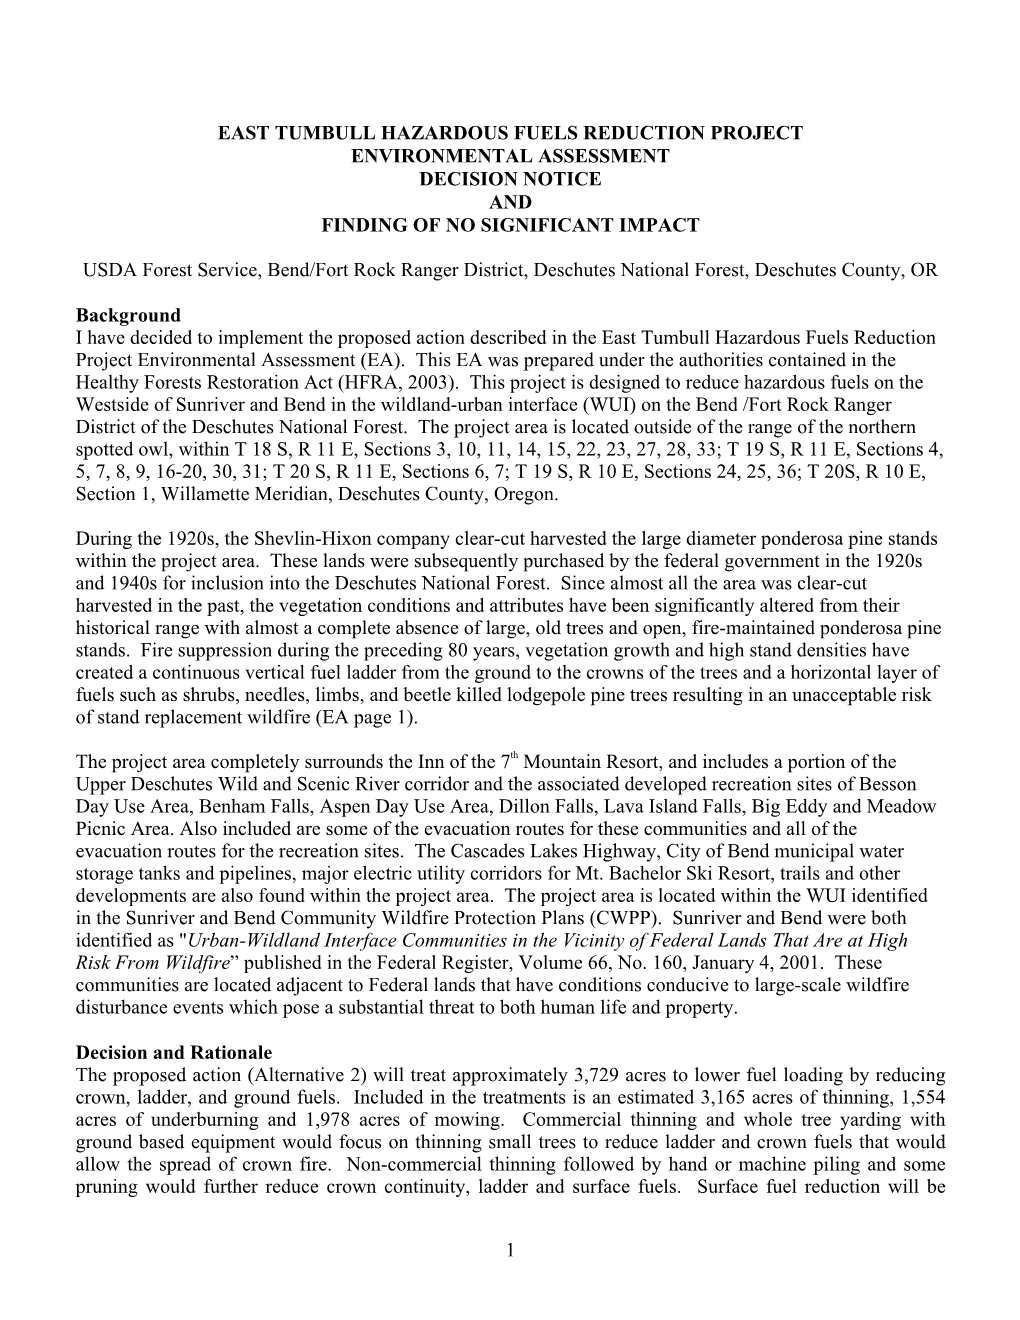 East Tumbull Hazardous Fuels Reduction Project Environmental Assessment Decision Notice and Finding of No Significant Impact